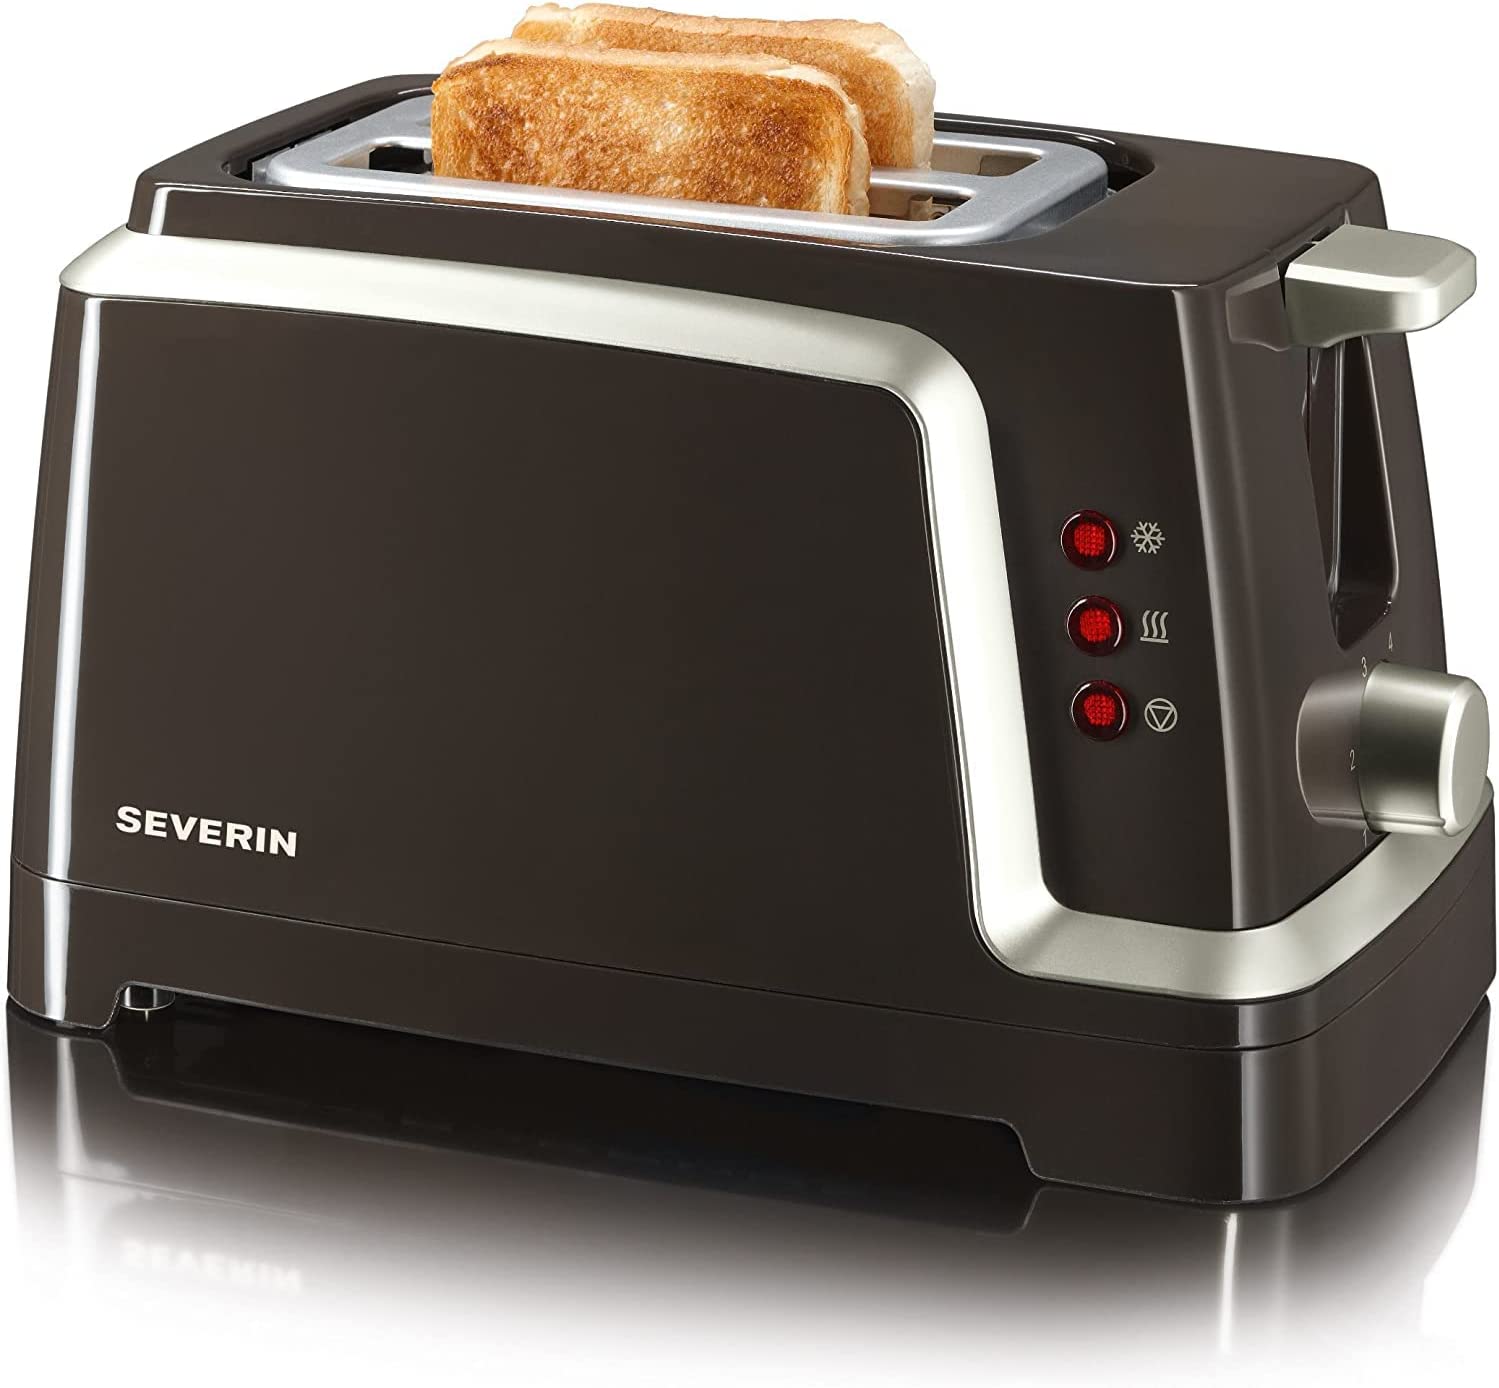 Severin AT 2223 Automatic Toaster, Brown Titanium